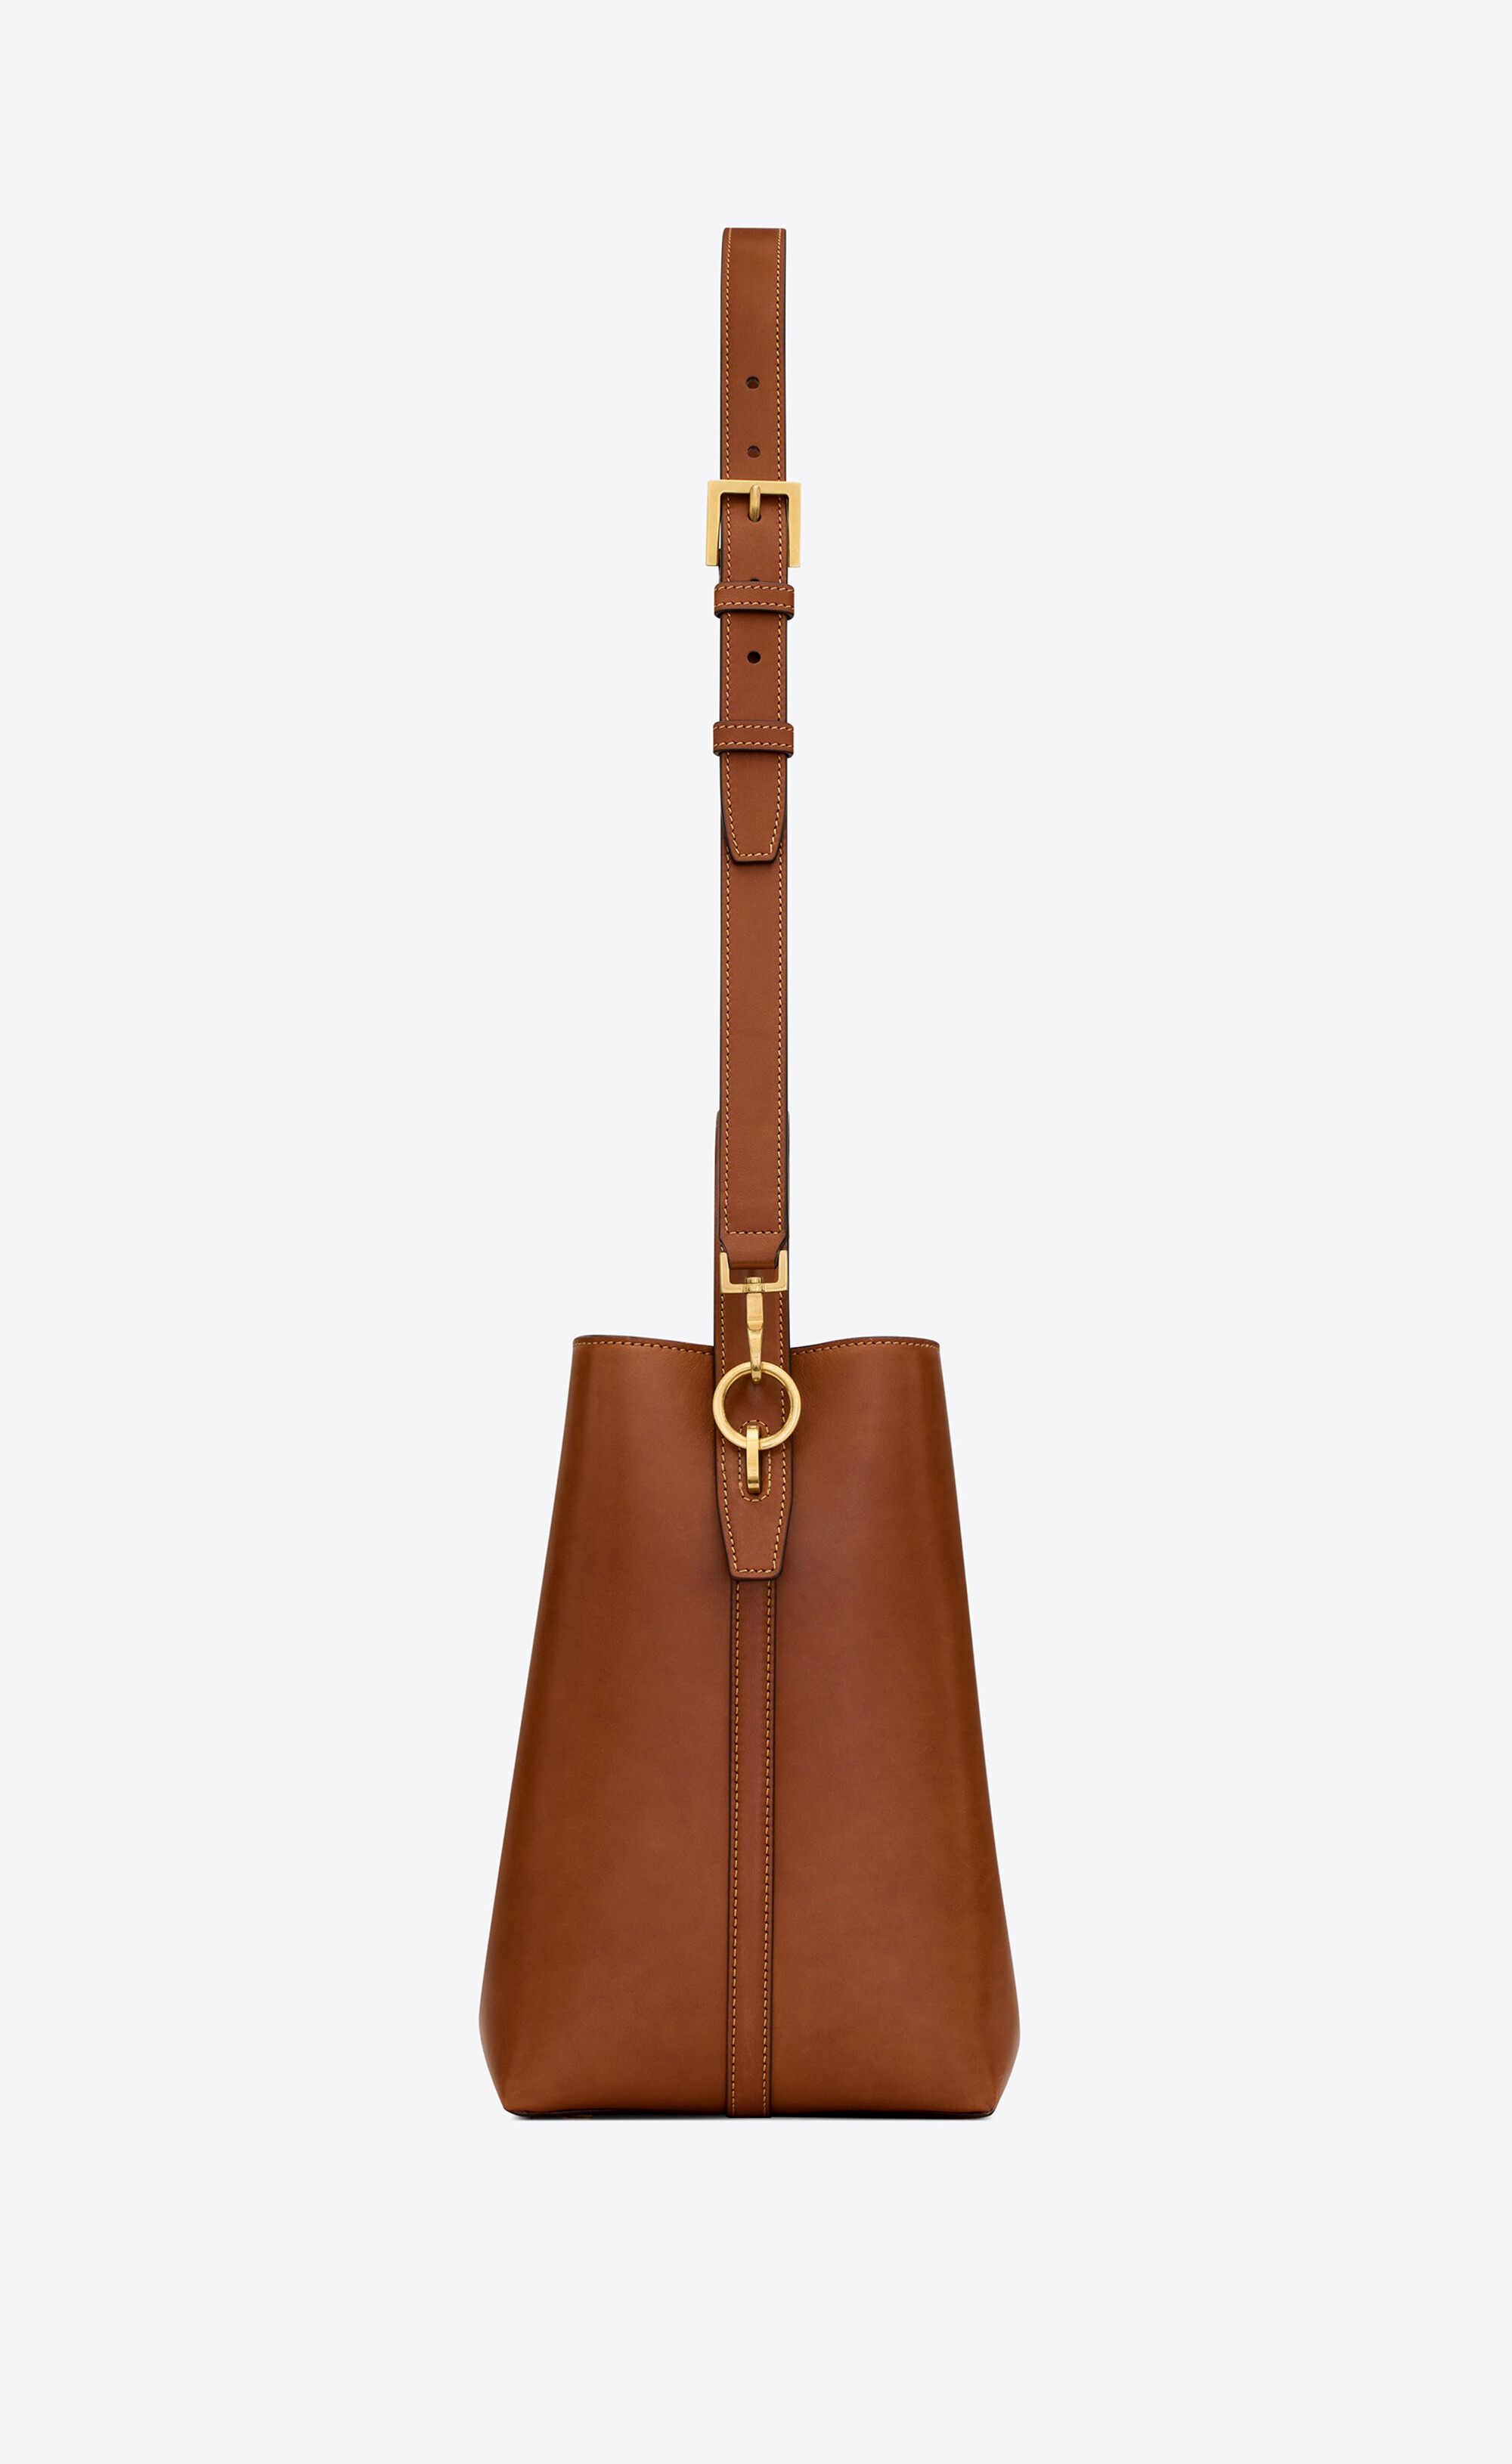 le 37 in vegetable-tanned leather - 6